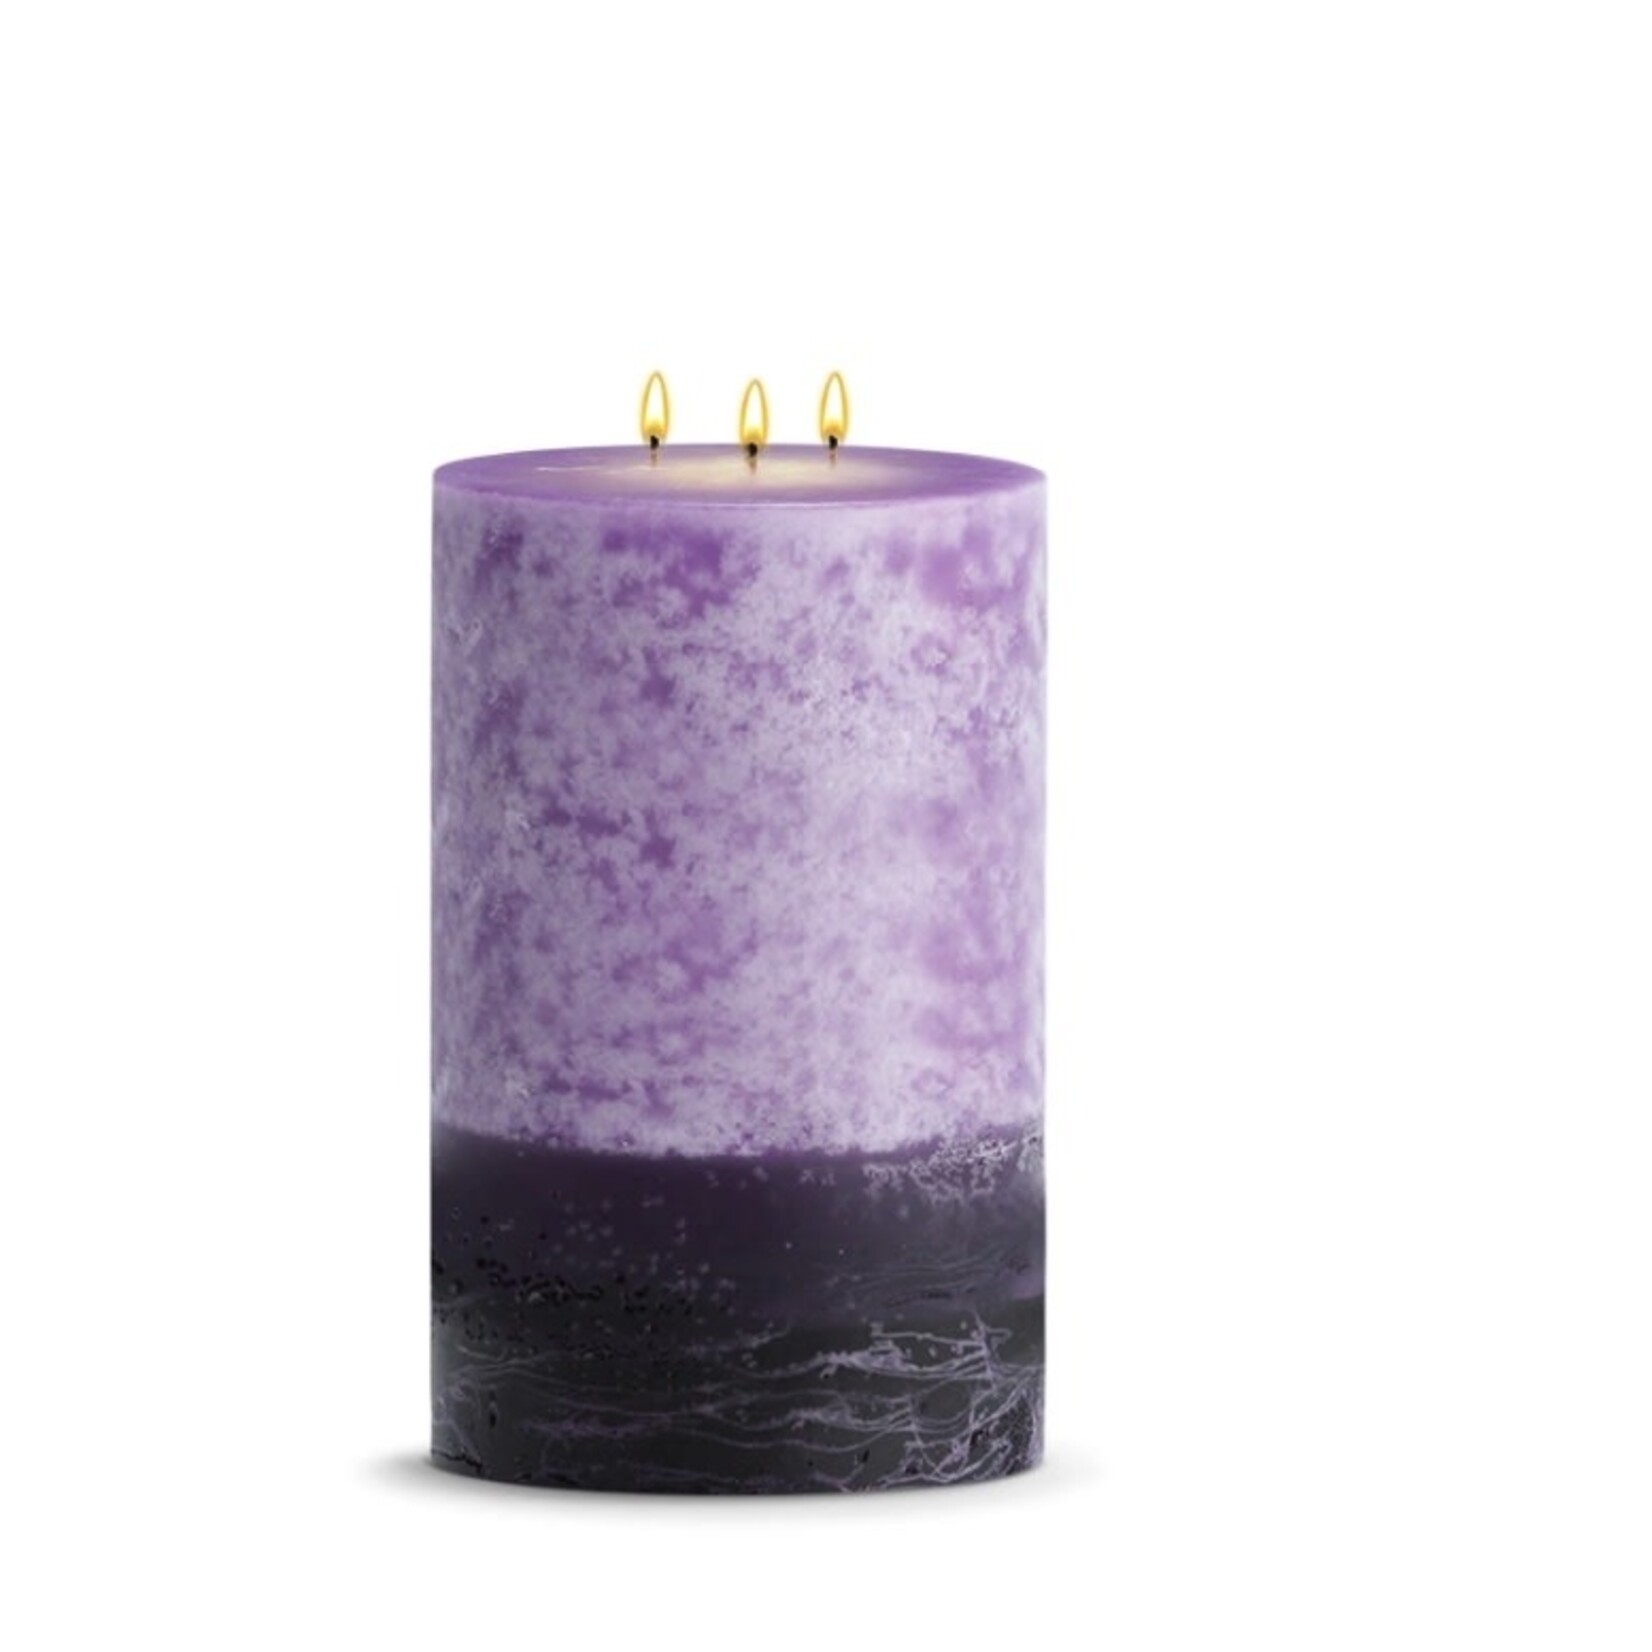 STONE CANDLES STONE PILLAR CANDLE 6X12 LAVENDER